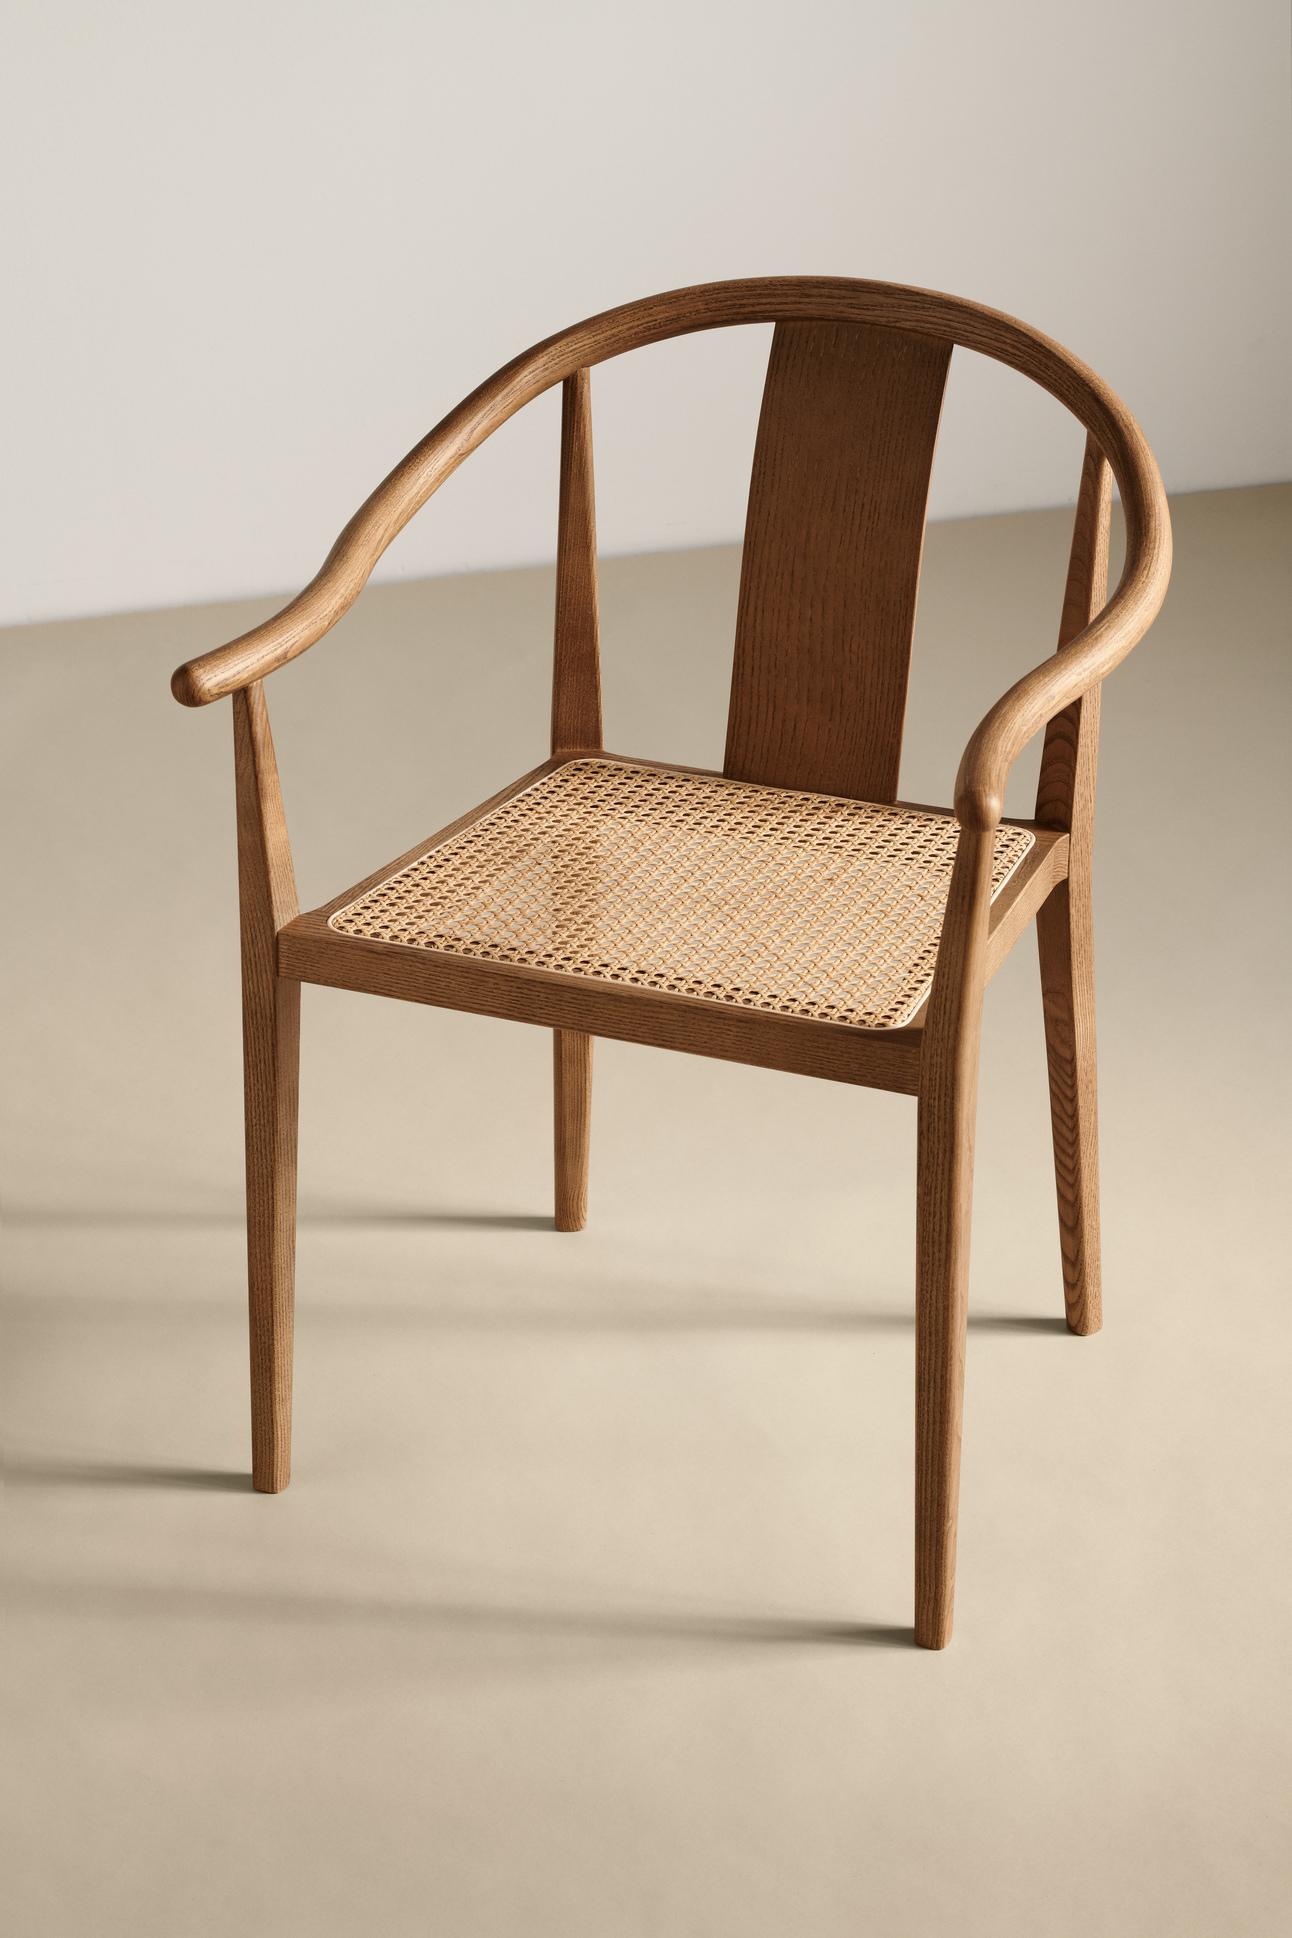 'Shanghai' Chair by Norr11, Light Smoked Oak, Natural Rattan For Sale 3